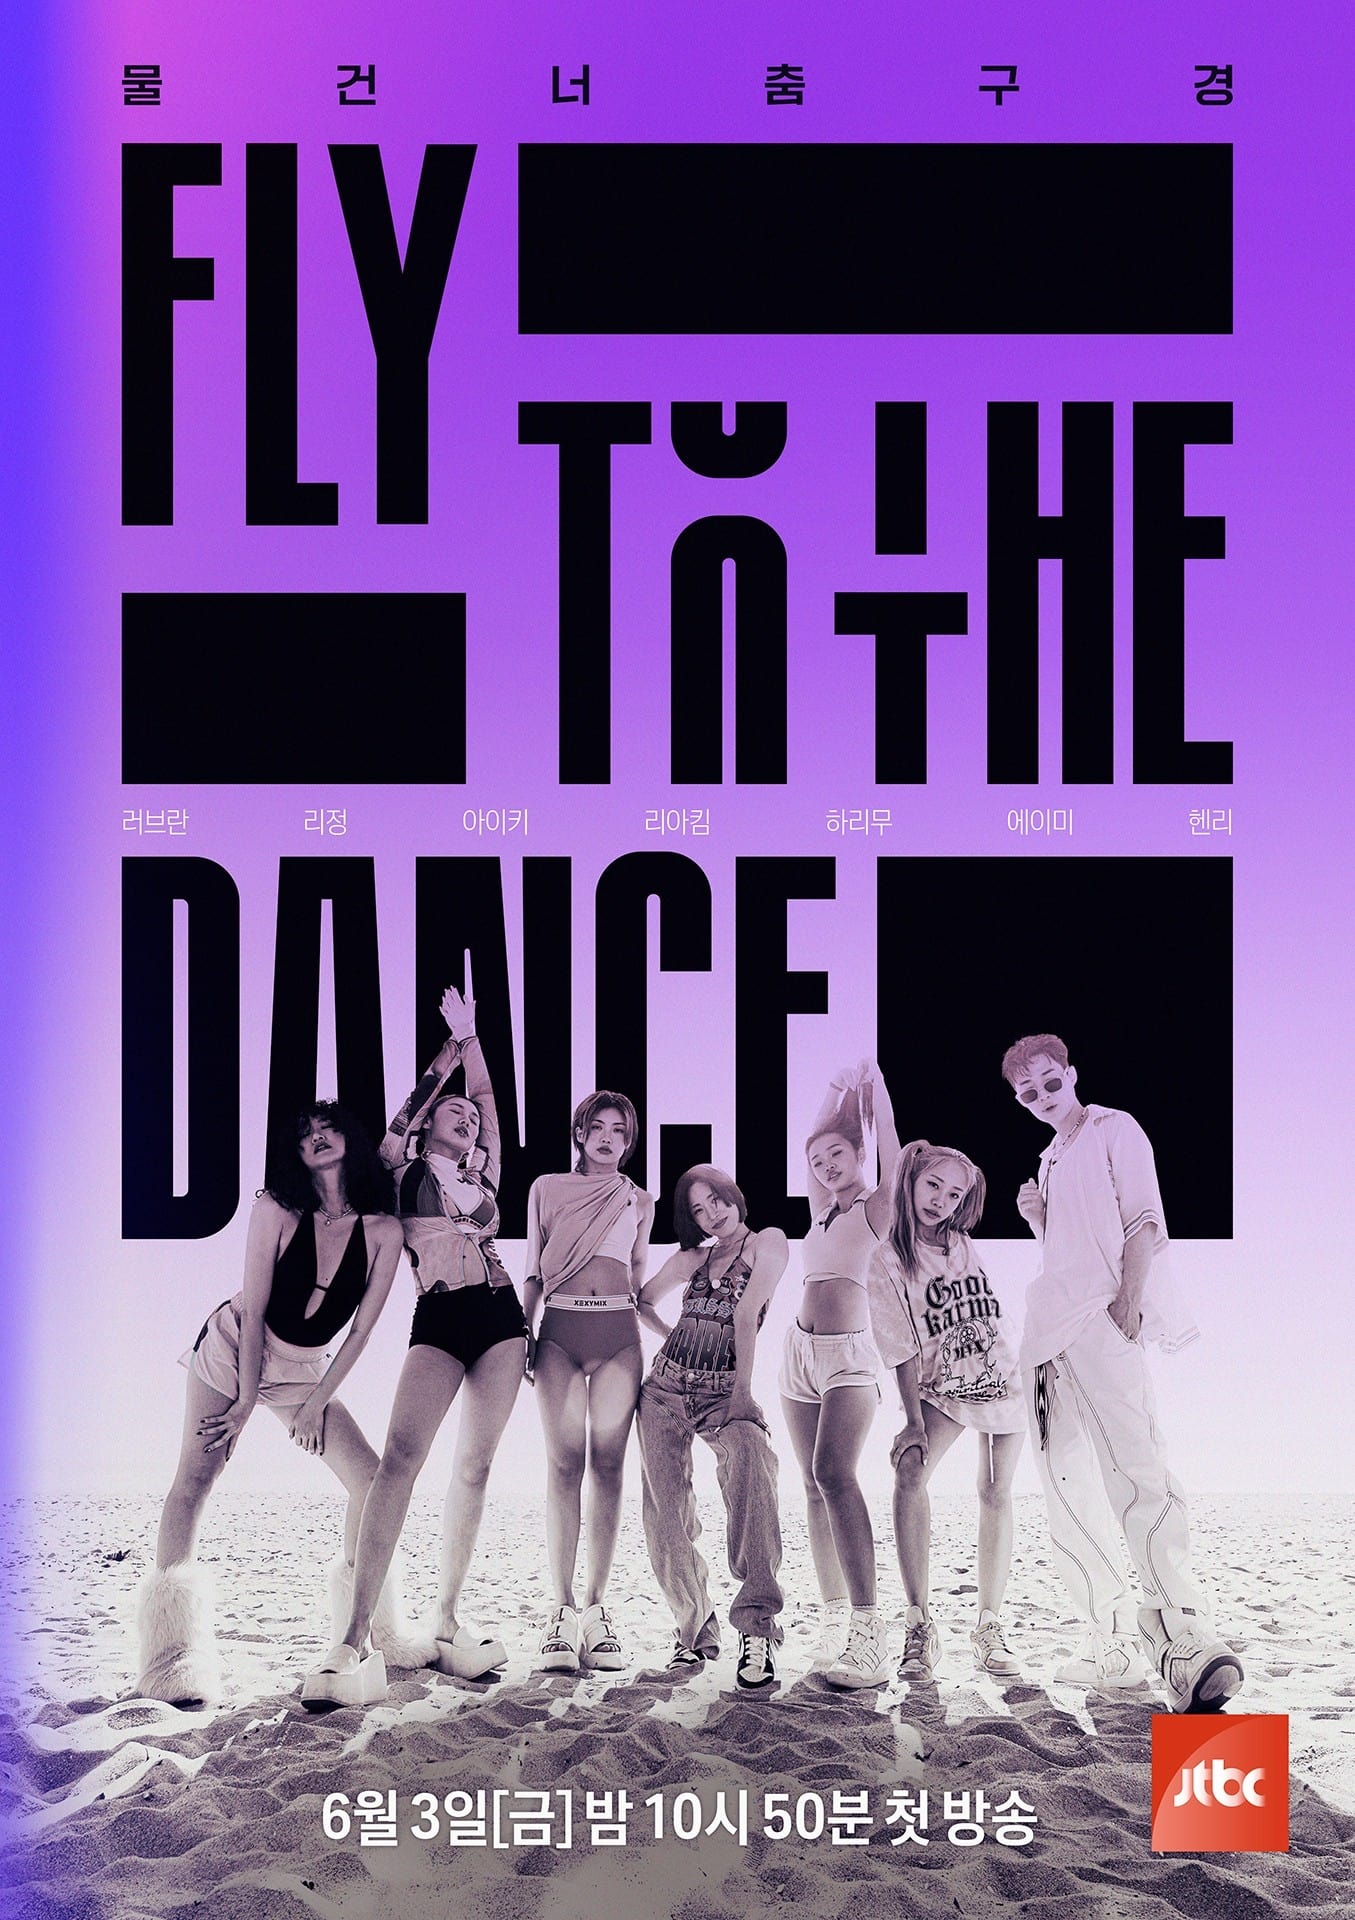 TV ratings for Fly To The Dance (플라이 투 더 댄스) in Alemania. JTBC TV series